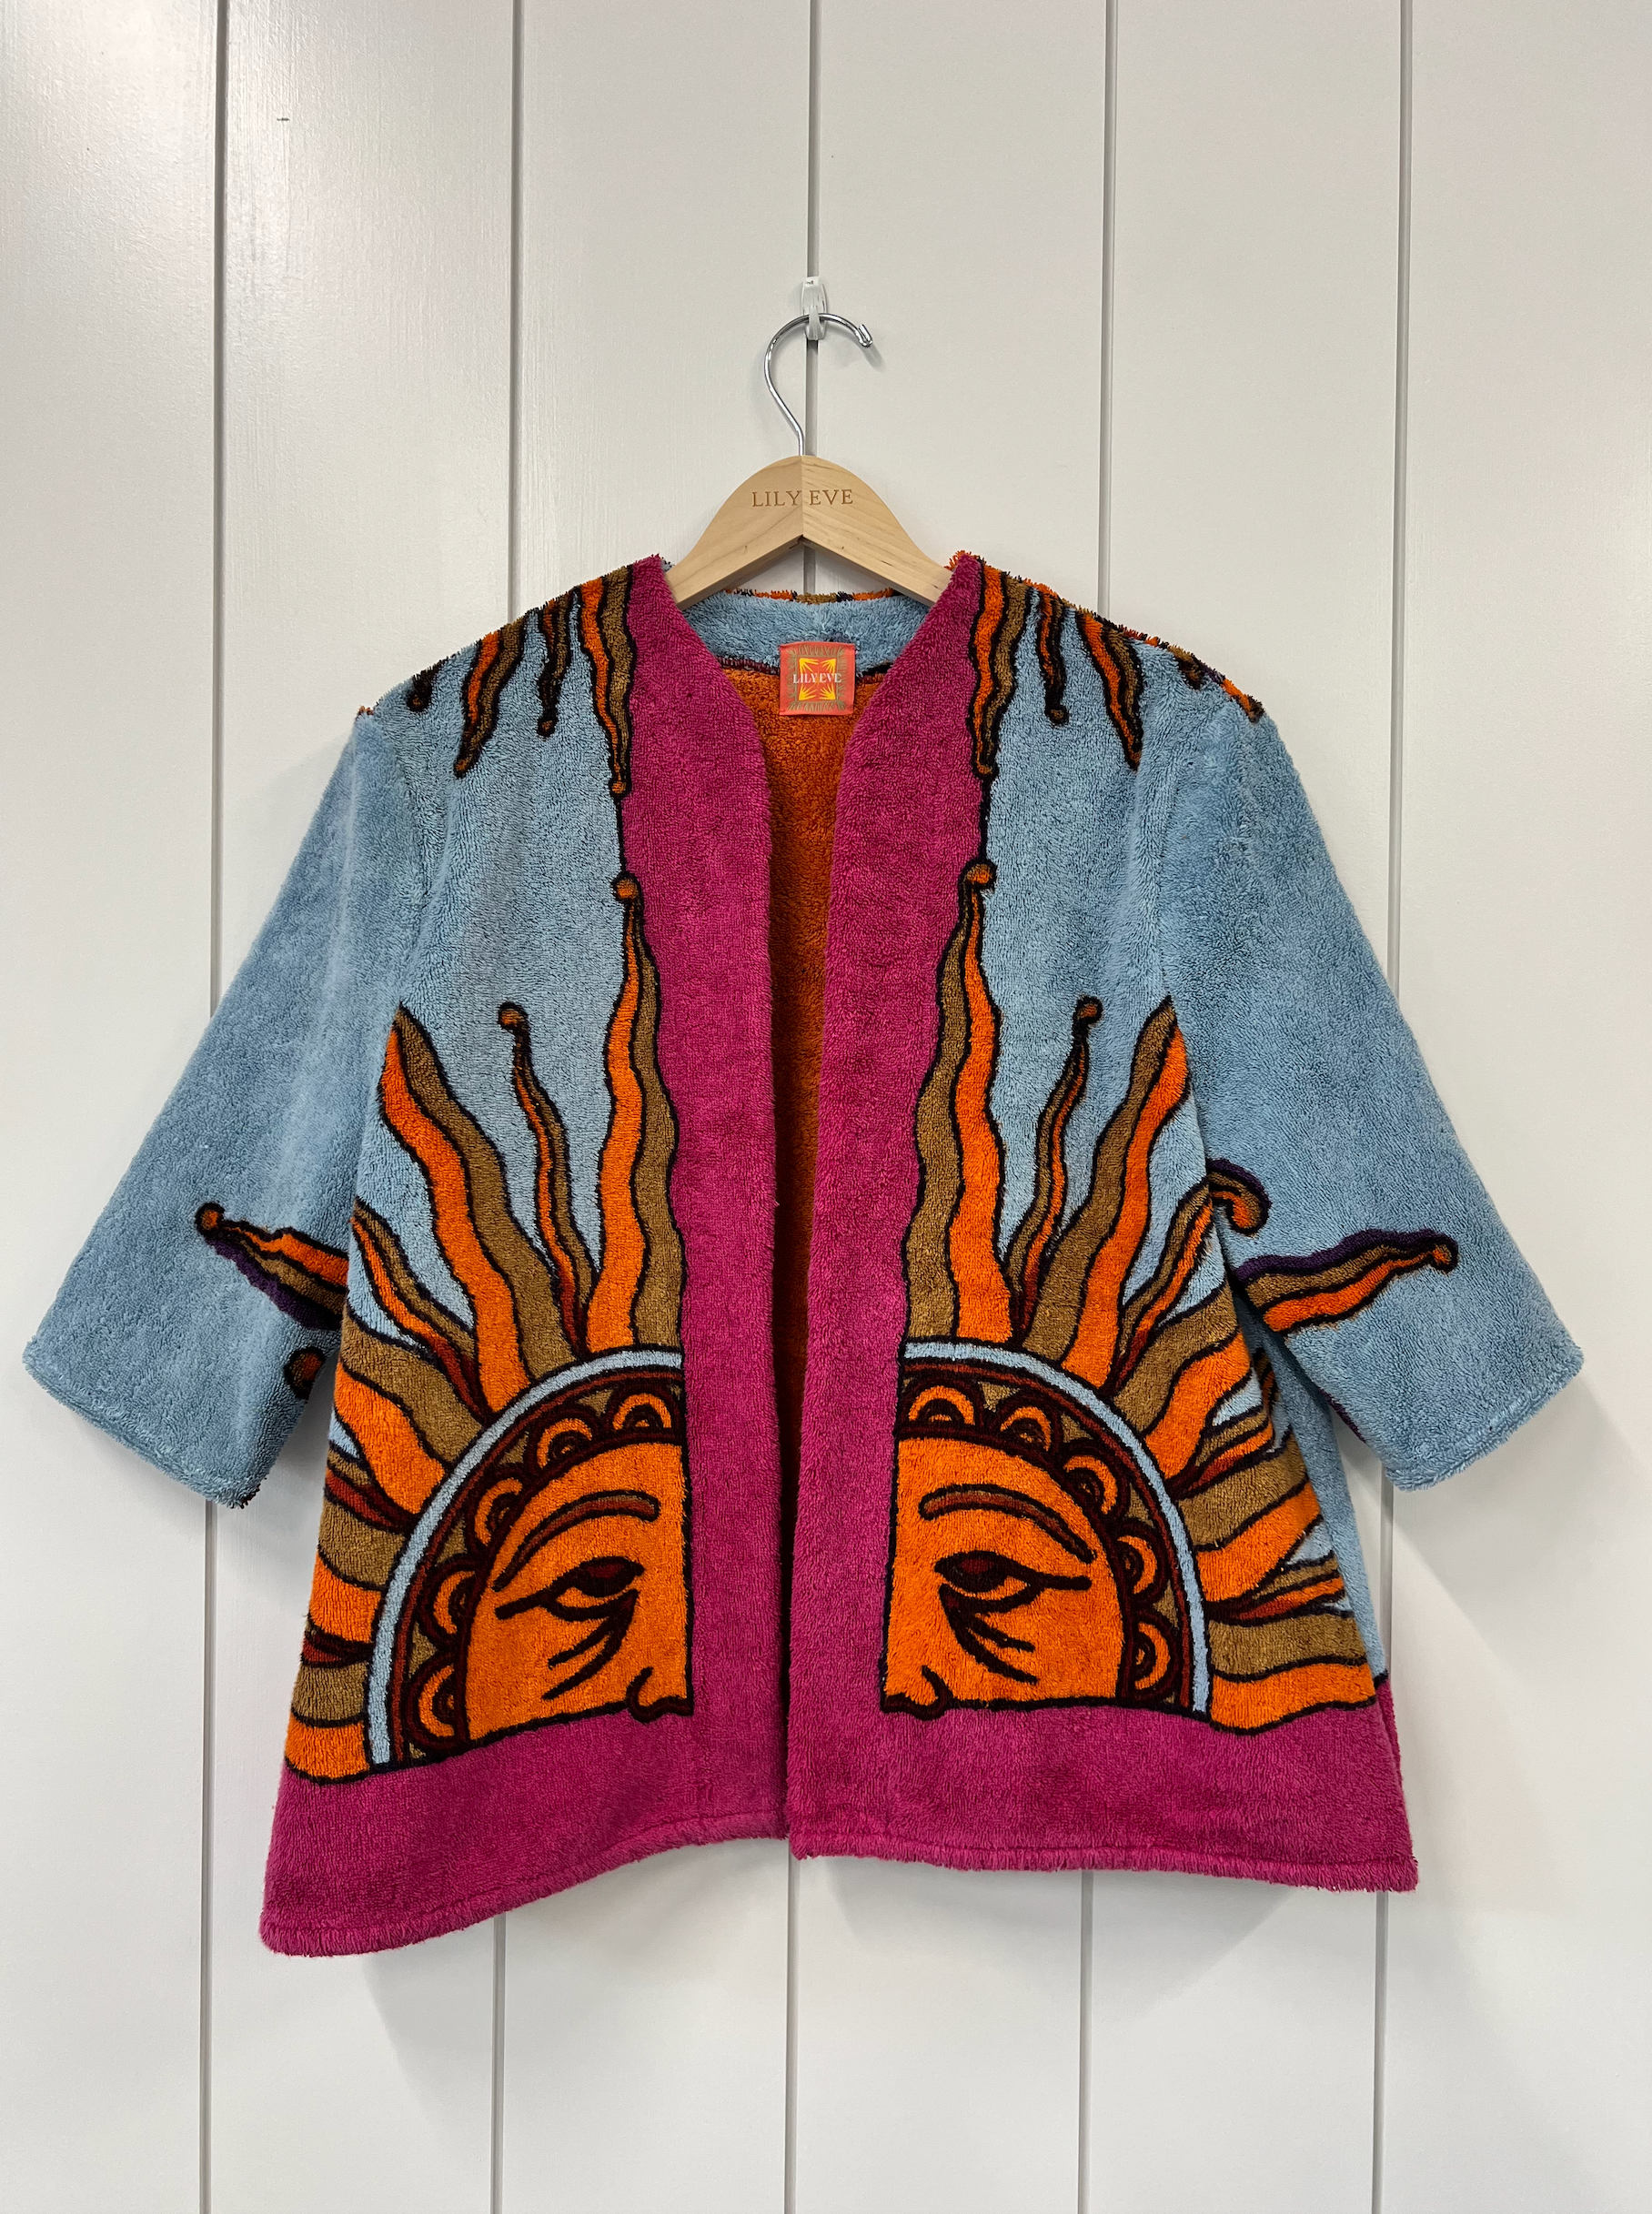 The Red SunDial Jacket